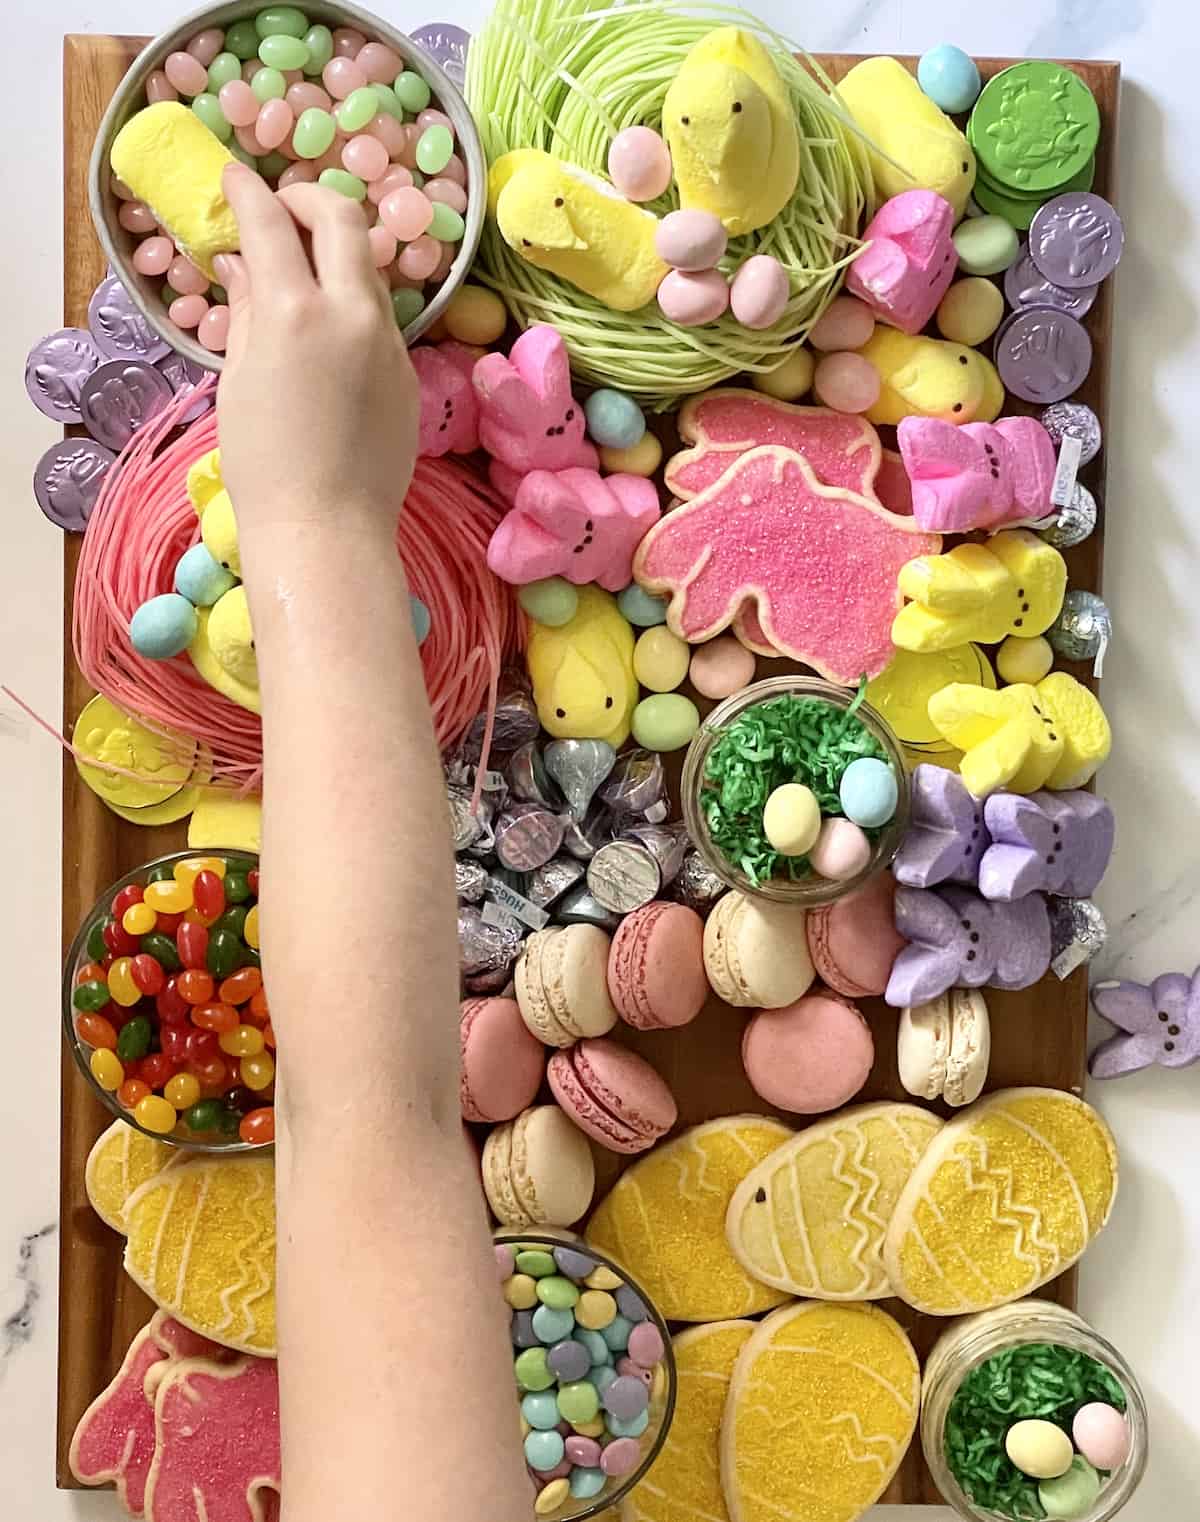 child helping to arrange a candy board for Easter